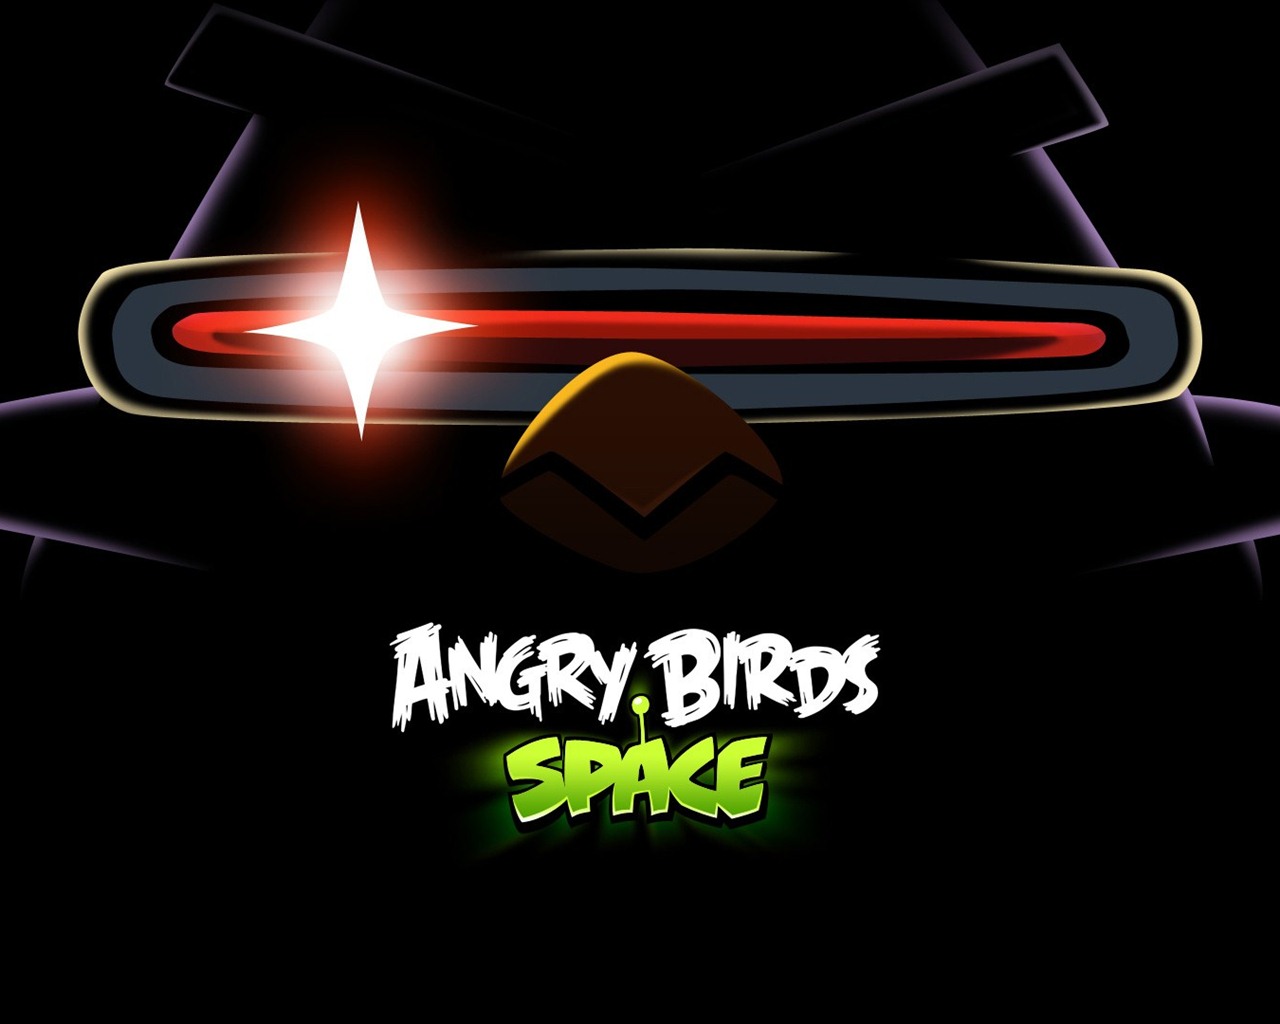 Angry Birds Game Wallpapers #22 - 1280x1024